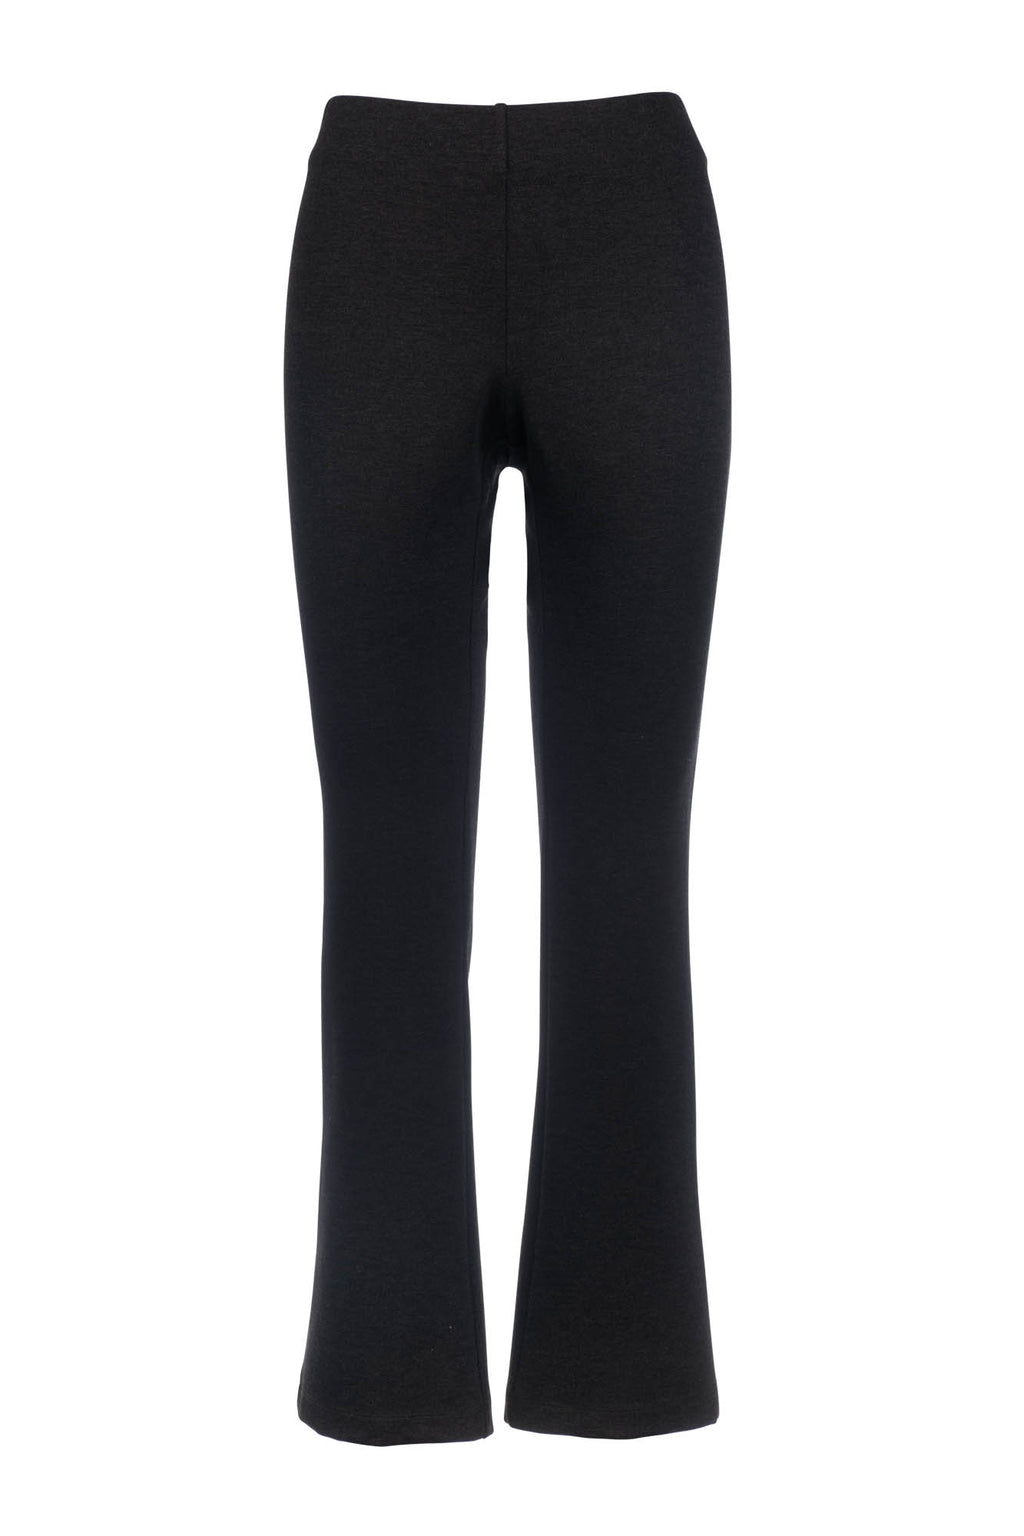 Full Length Flare Pant - Charcoal Ponte